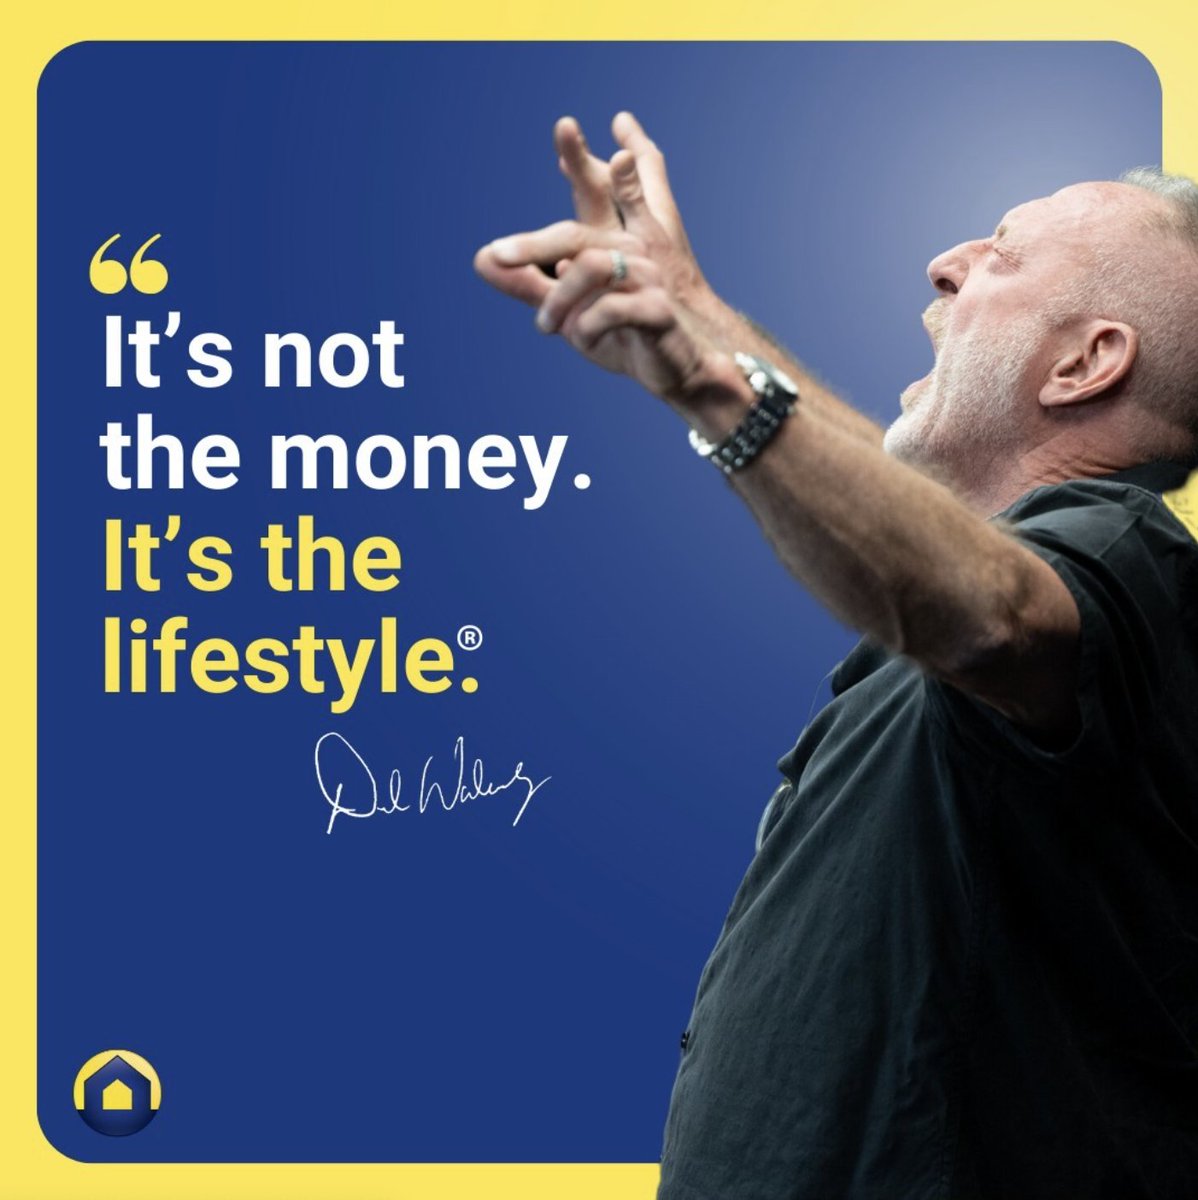 luinc: #delquotes #delsays #wealthbuilding #investingsuccess #lifestylesunlimited #realestateinvesting #retire #passiveincome #buildwealth #FinancialFreedom